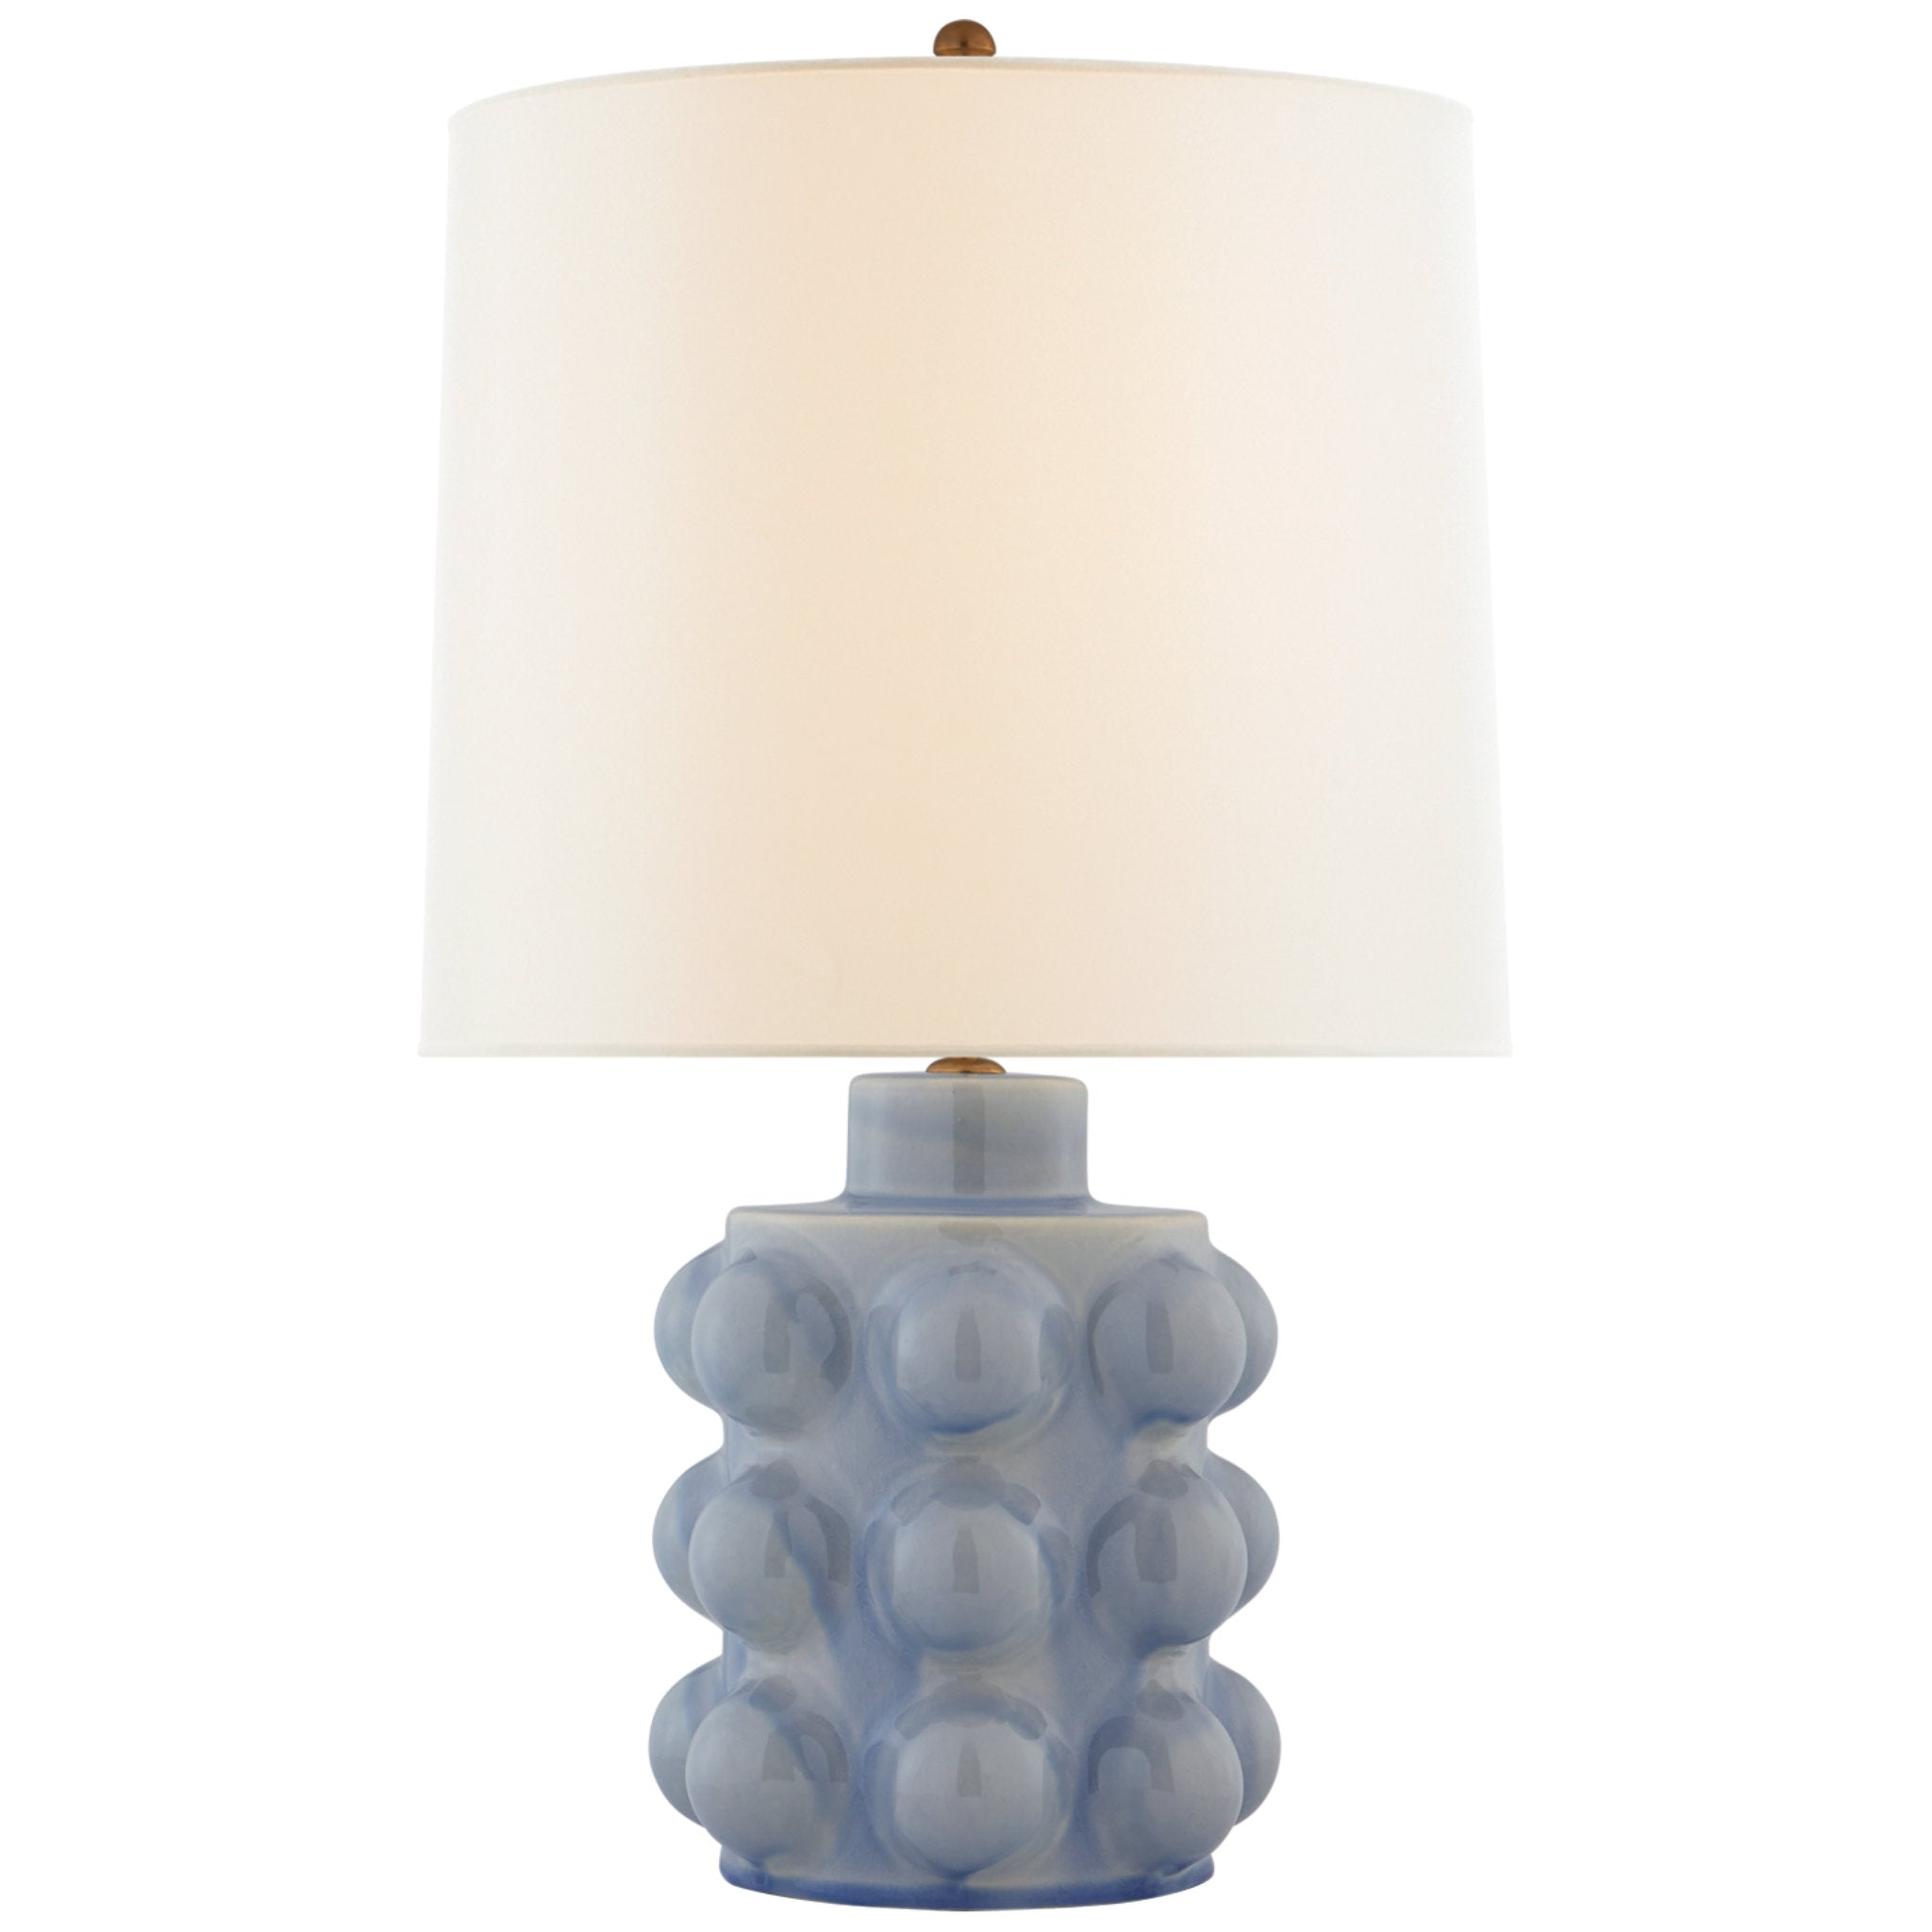 AERIN Vedra Medium Table Lamp in Polar Blue Crackle with Linen Shade